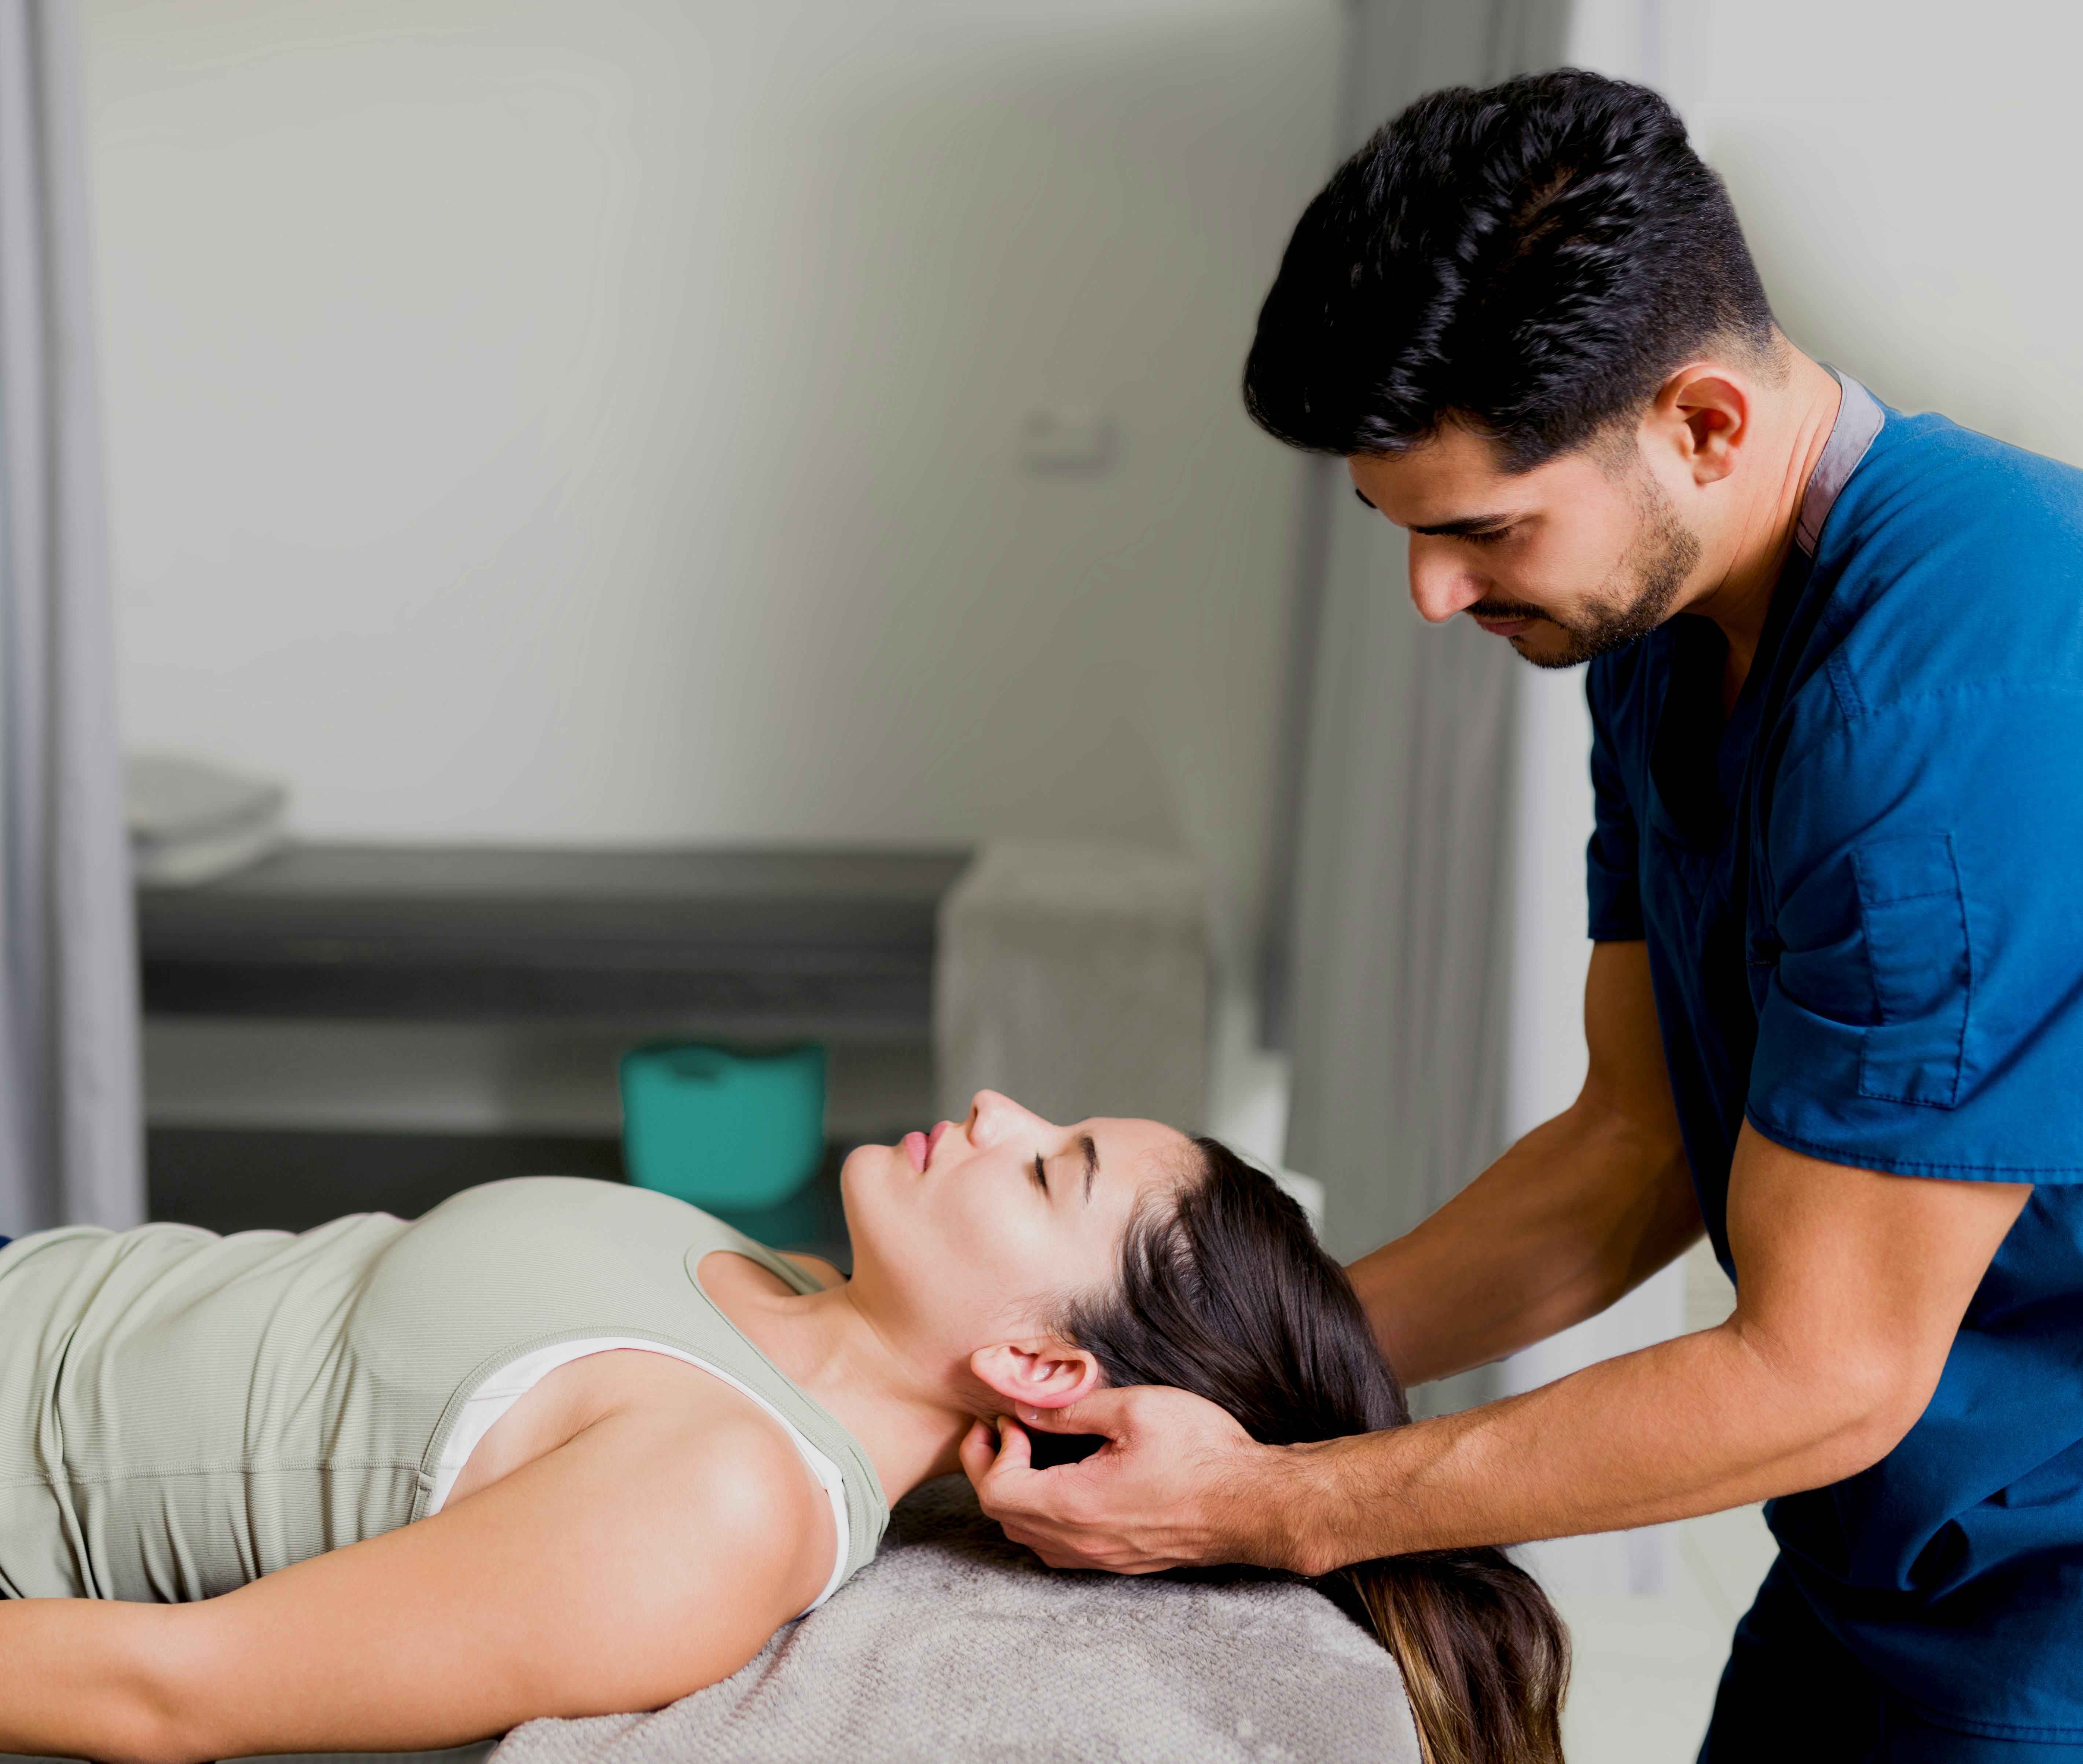 A woman is lying on her back on a massage table, receiving a neck massage from a masseur.